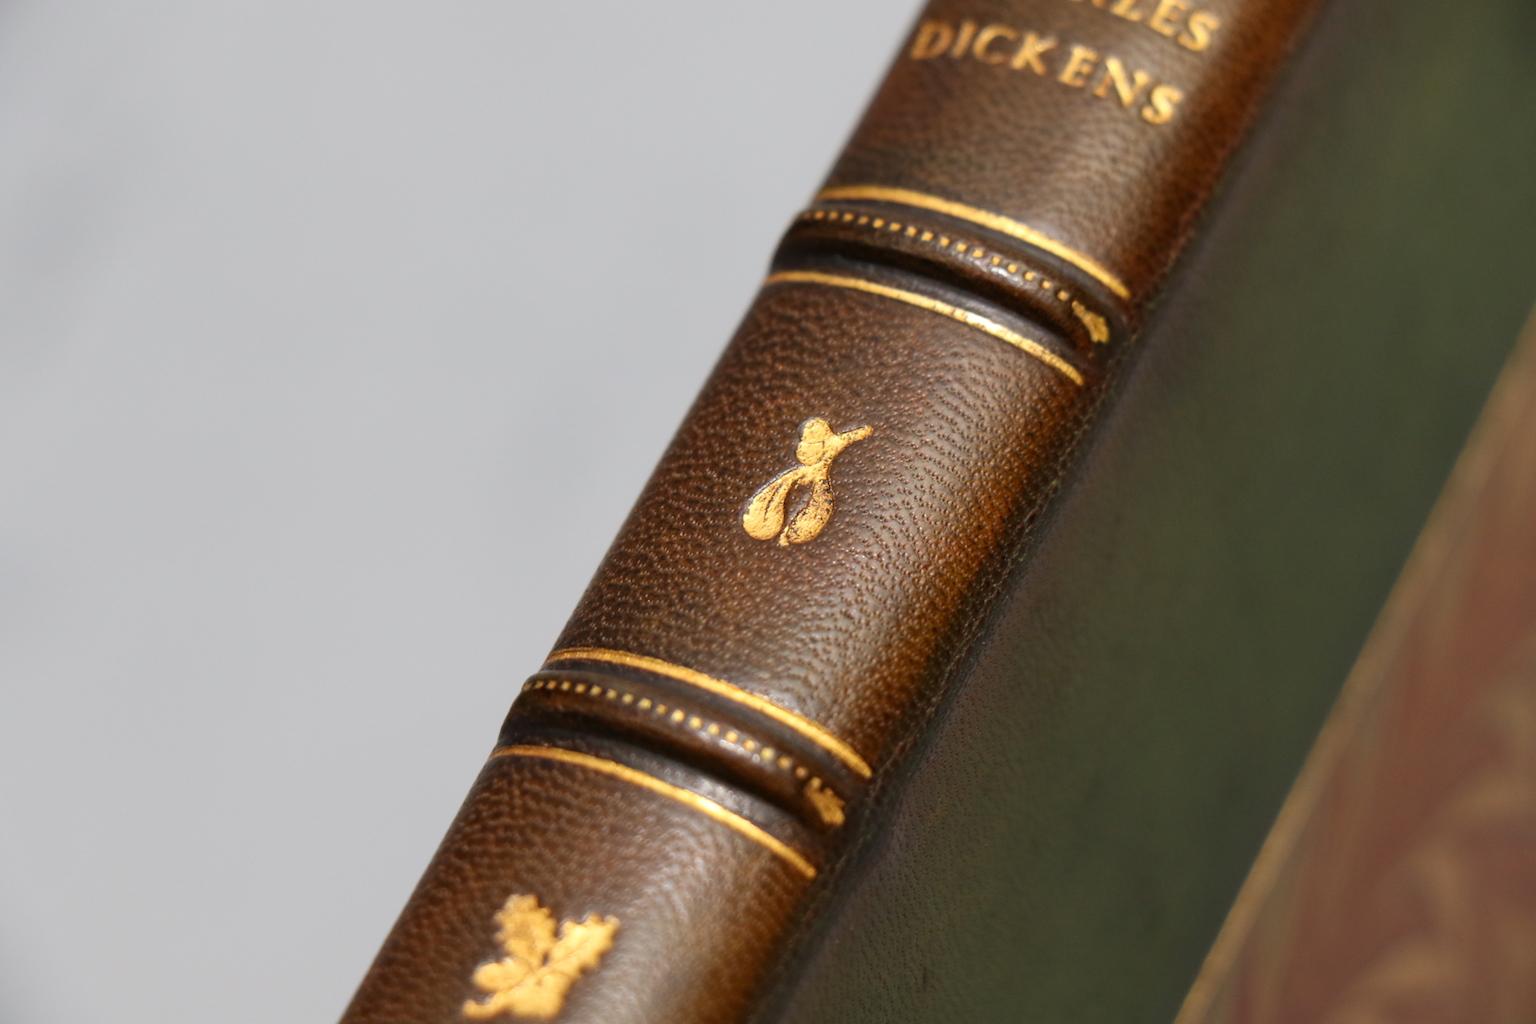 Dyed Books, Charles Dickens' 